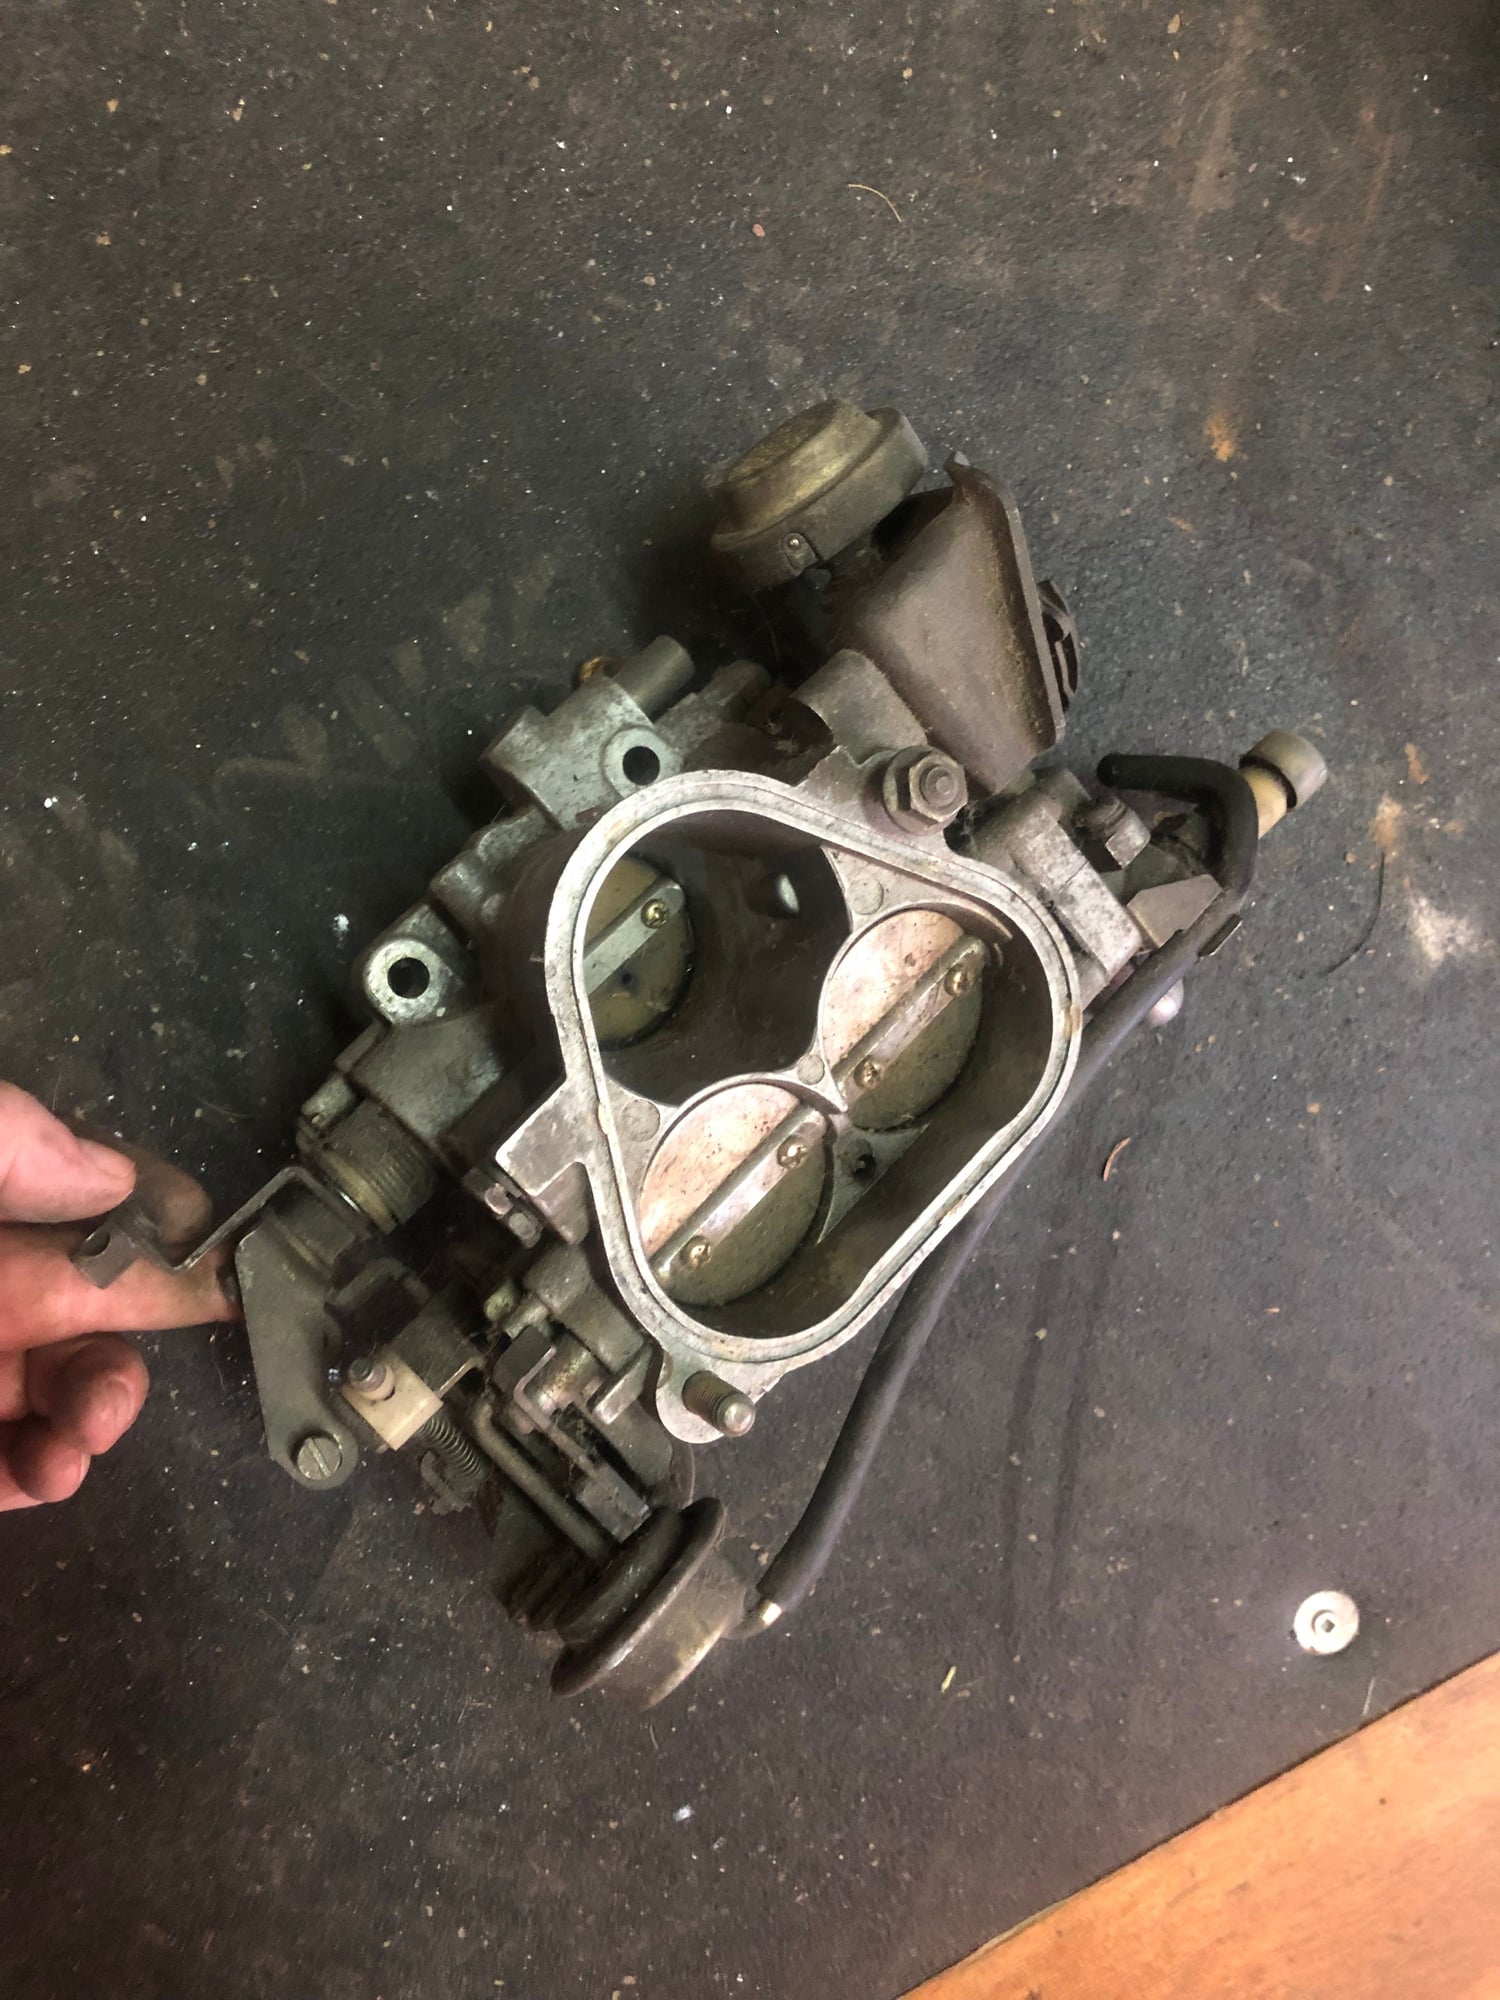 1988 Mazda RX-7 - Factory Turboii engine parts clear out - Moncton, NB E1E2G3, Canada